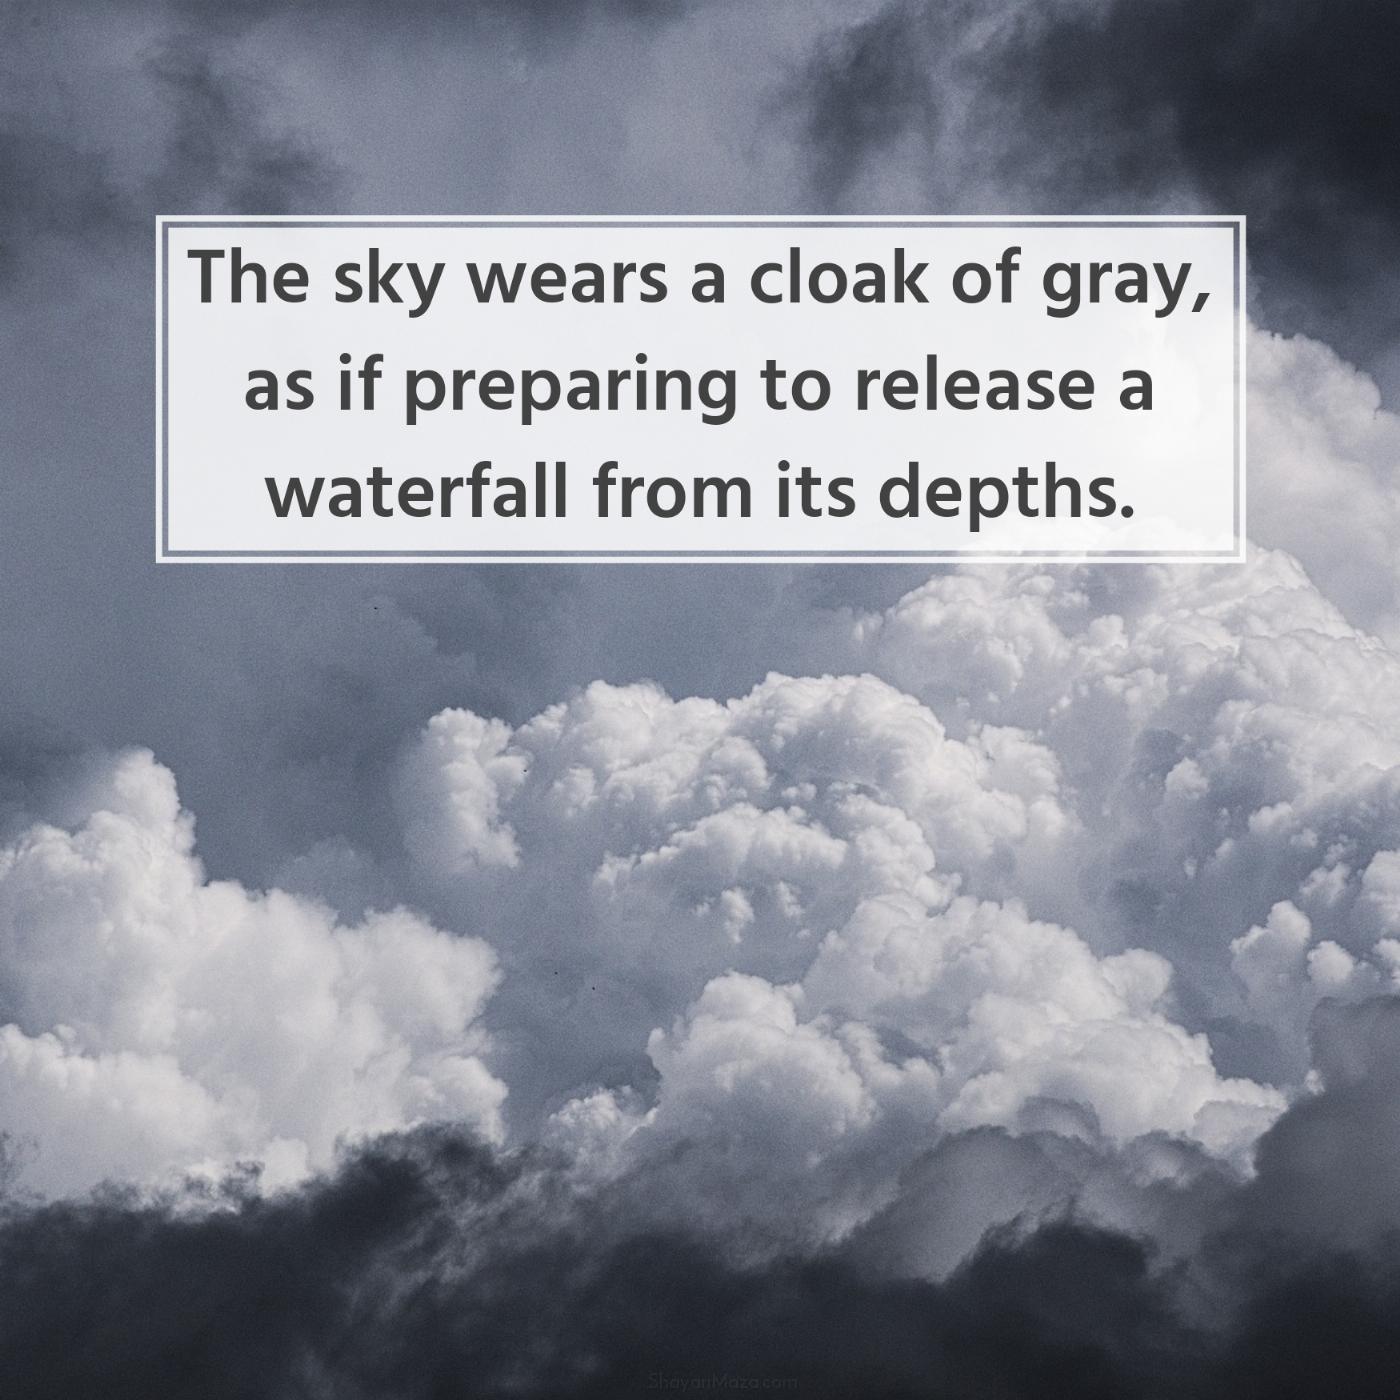 The sky wears a cloak of gray as if preparing to release a waterfall